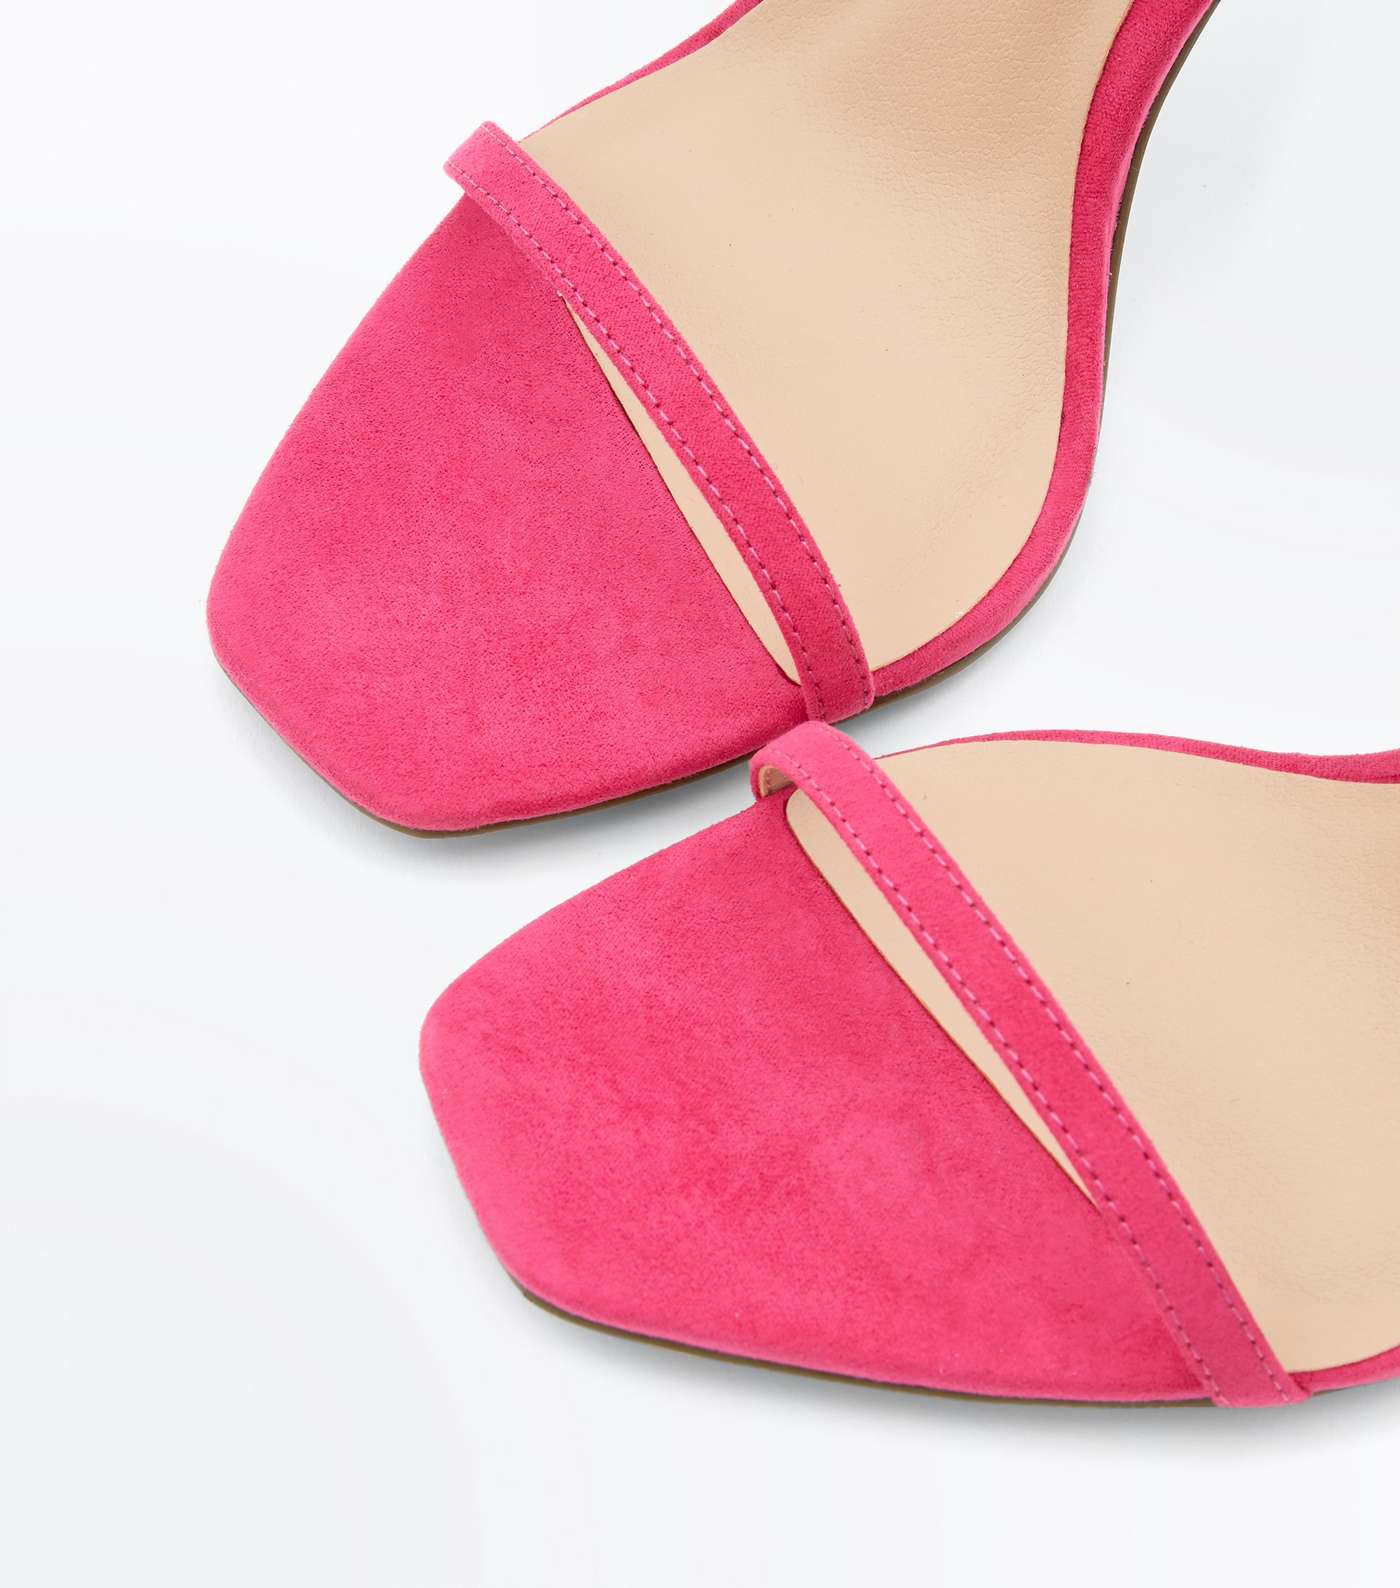 Bright Pink Suedette Barely There Stiletto Sandals Image 3